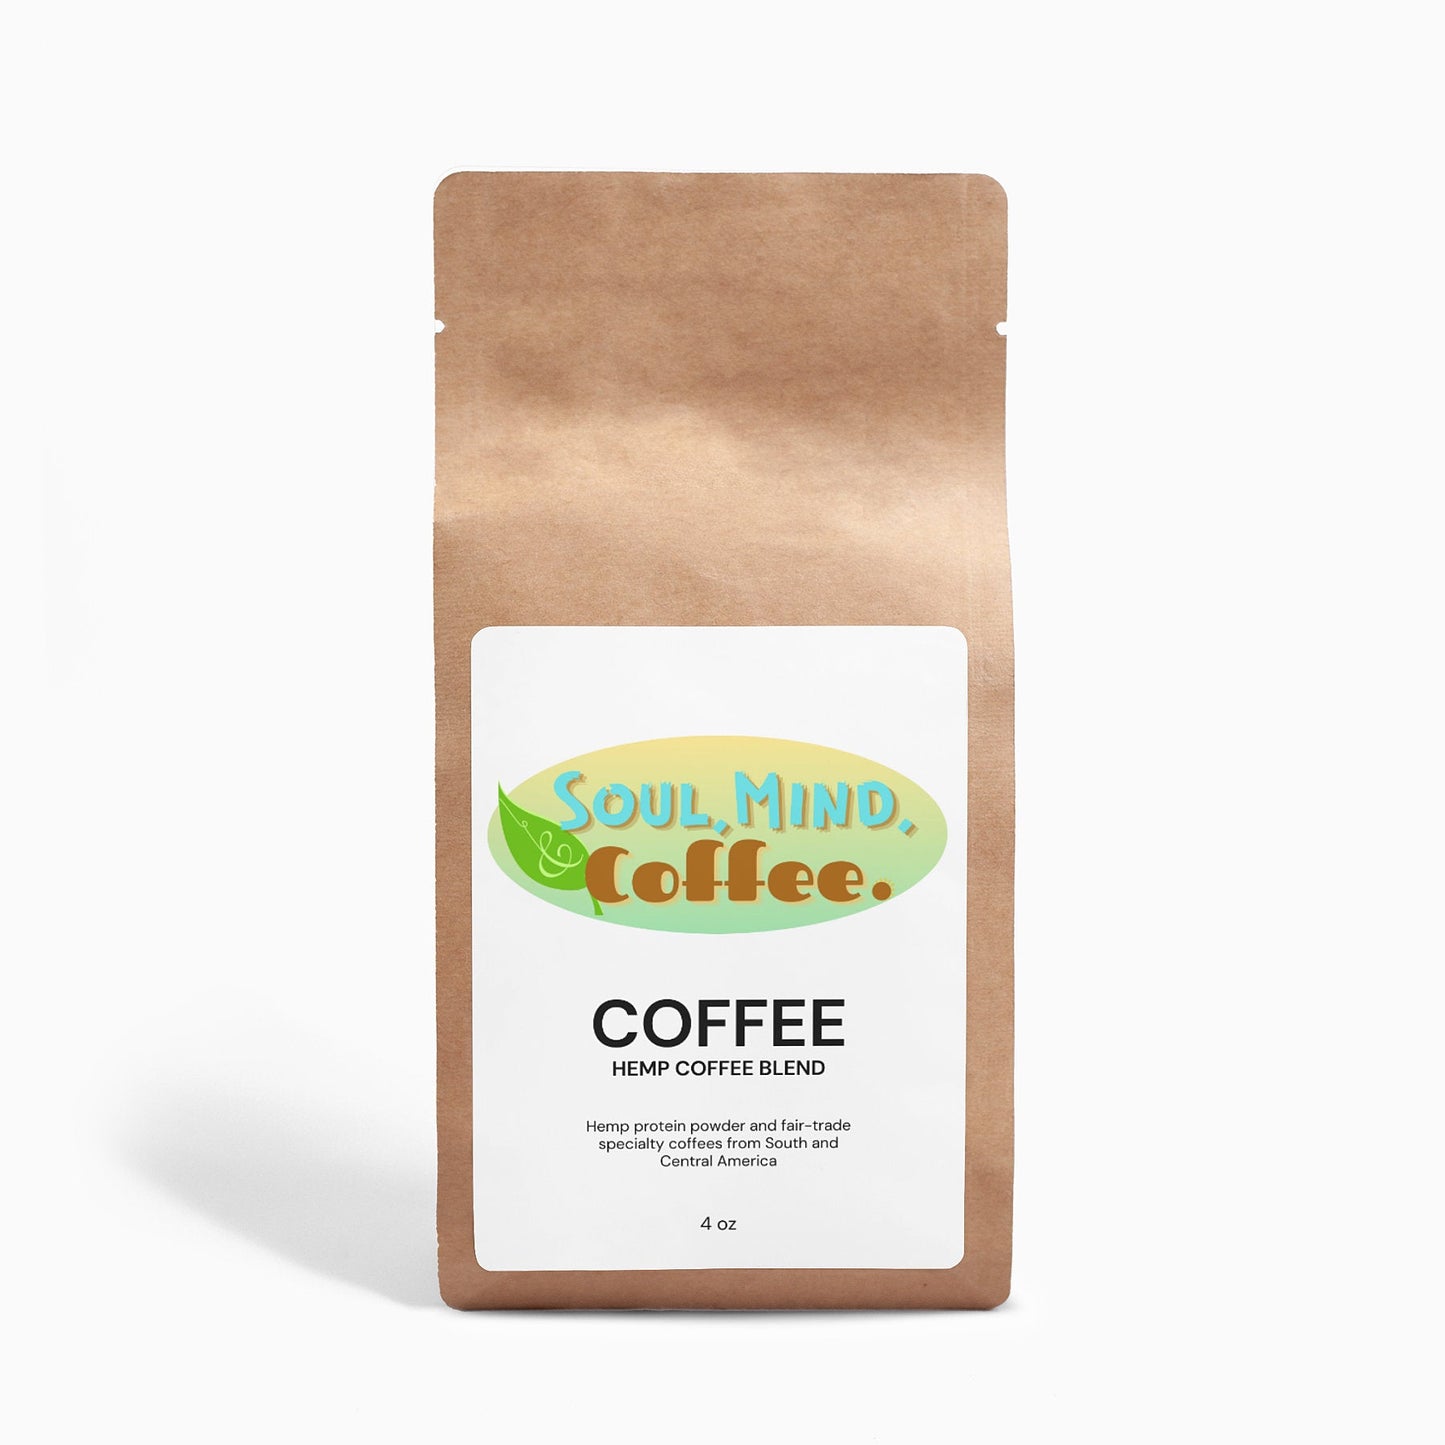 A close-up of the label on a bag of 4oz hemp coffee blend, showing the ingredients and nutritional information.